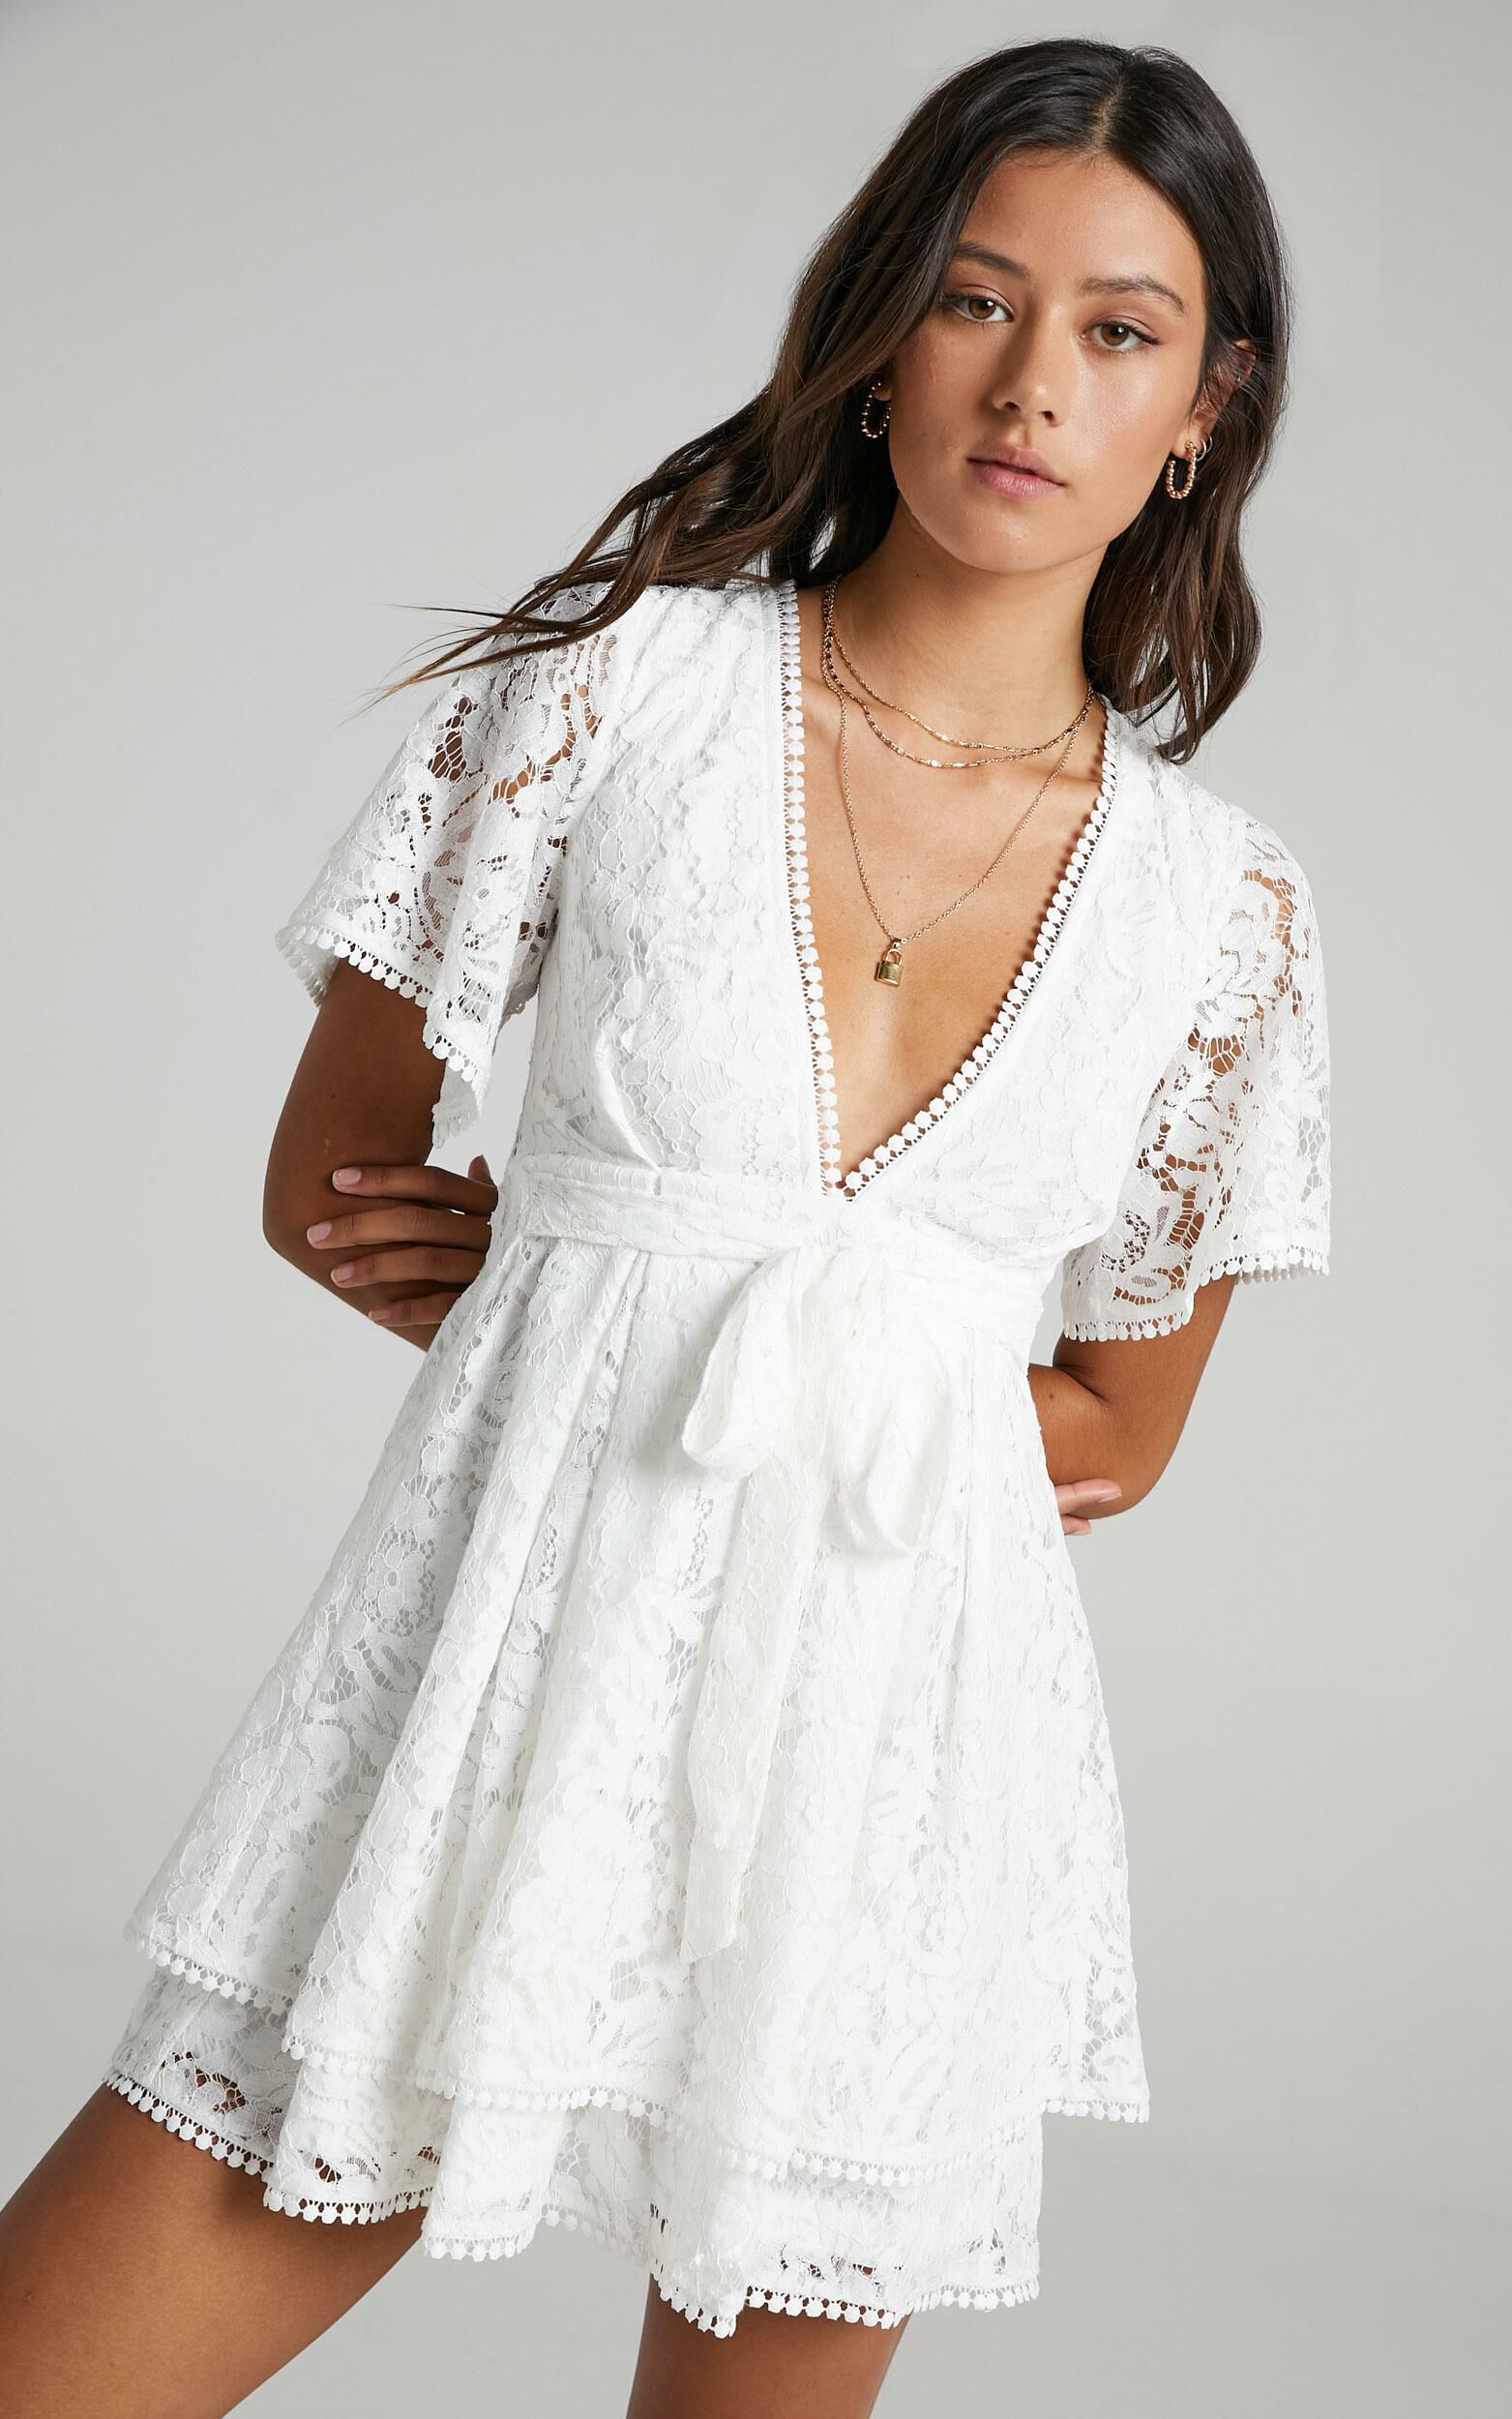 Do You Miss Me Dress in White Lace | Showpo